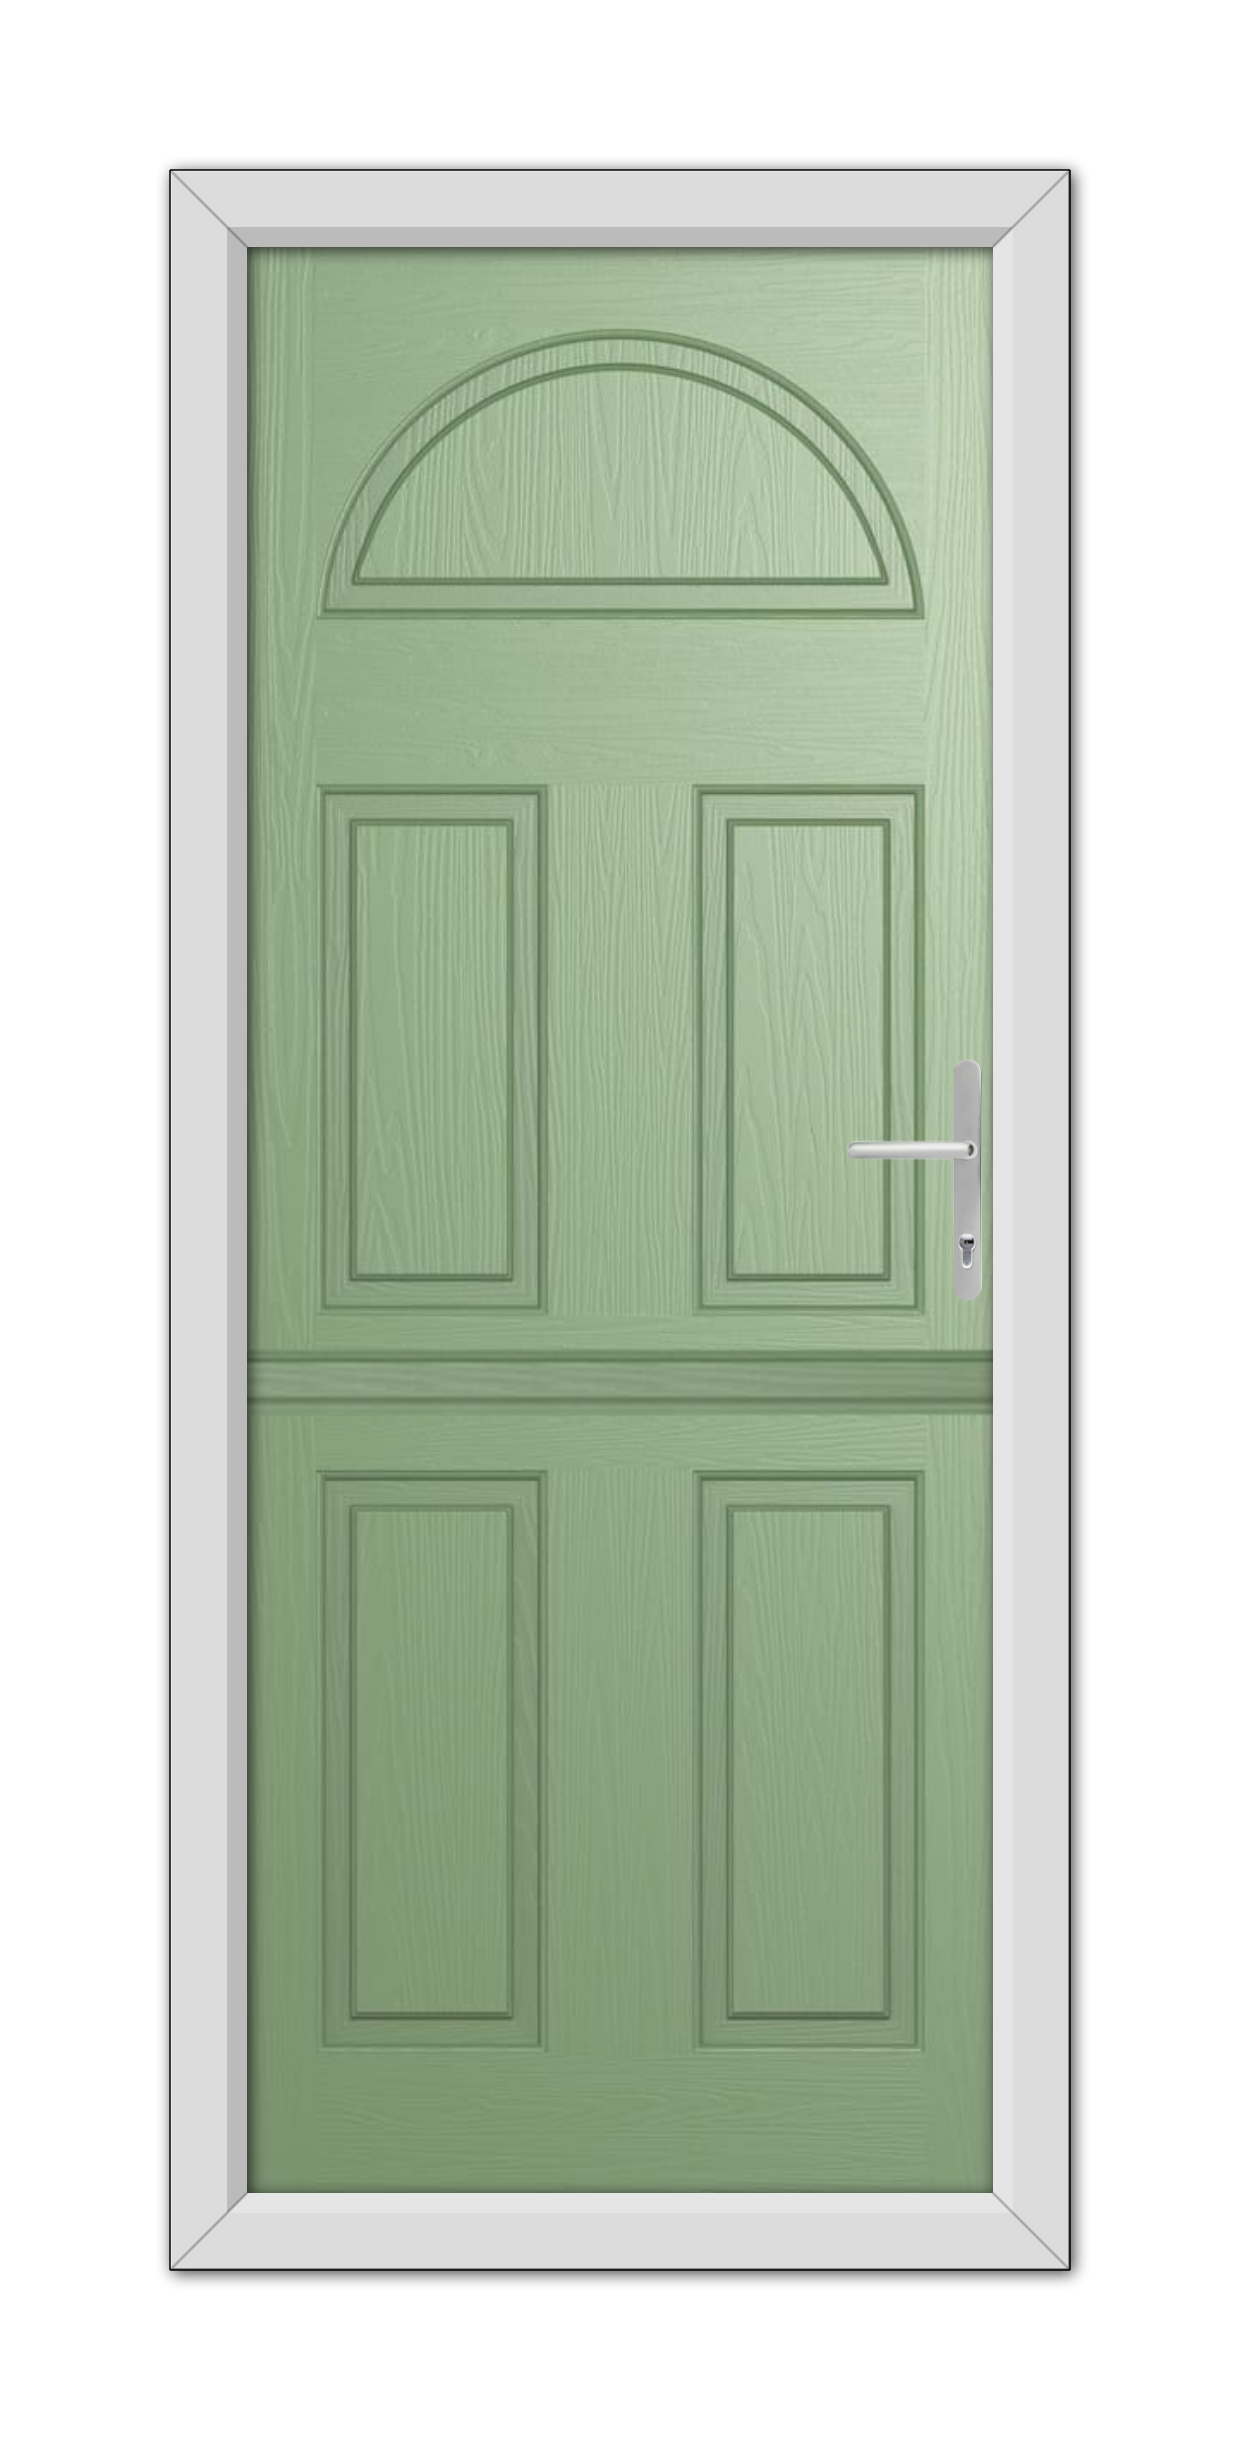 A Chartwell Green Winslow Solid Stable Composite Door with six panels and a semi-circular frosted glass window at the top, fitted within a white frame.